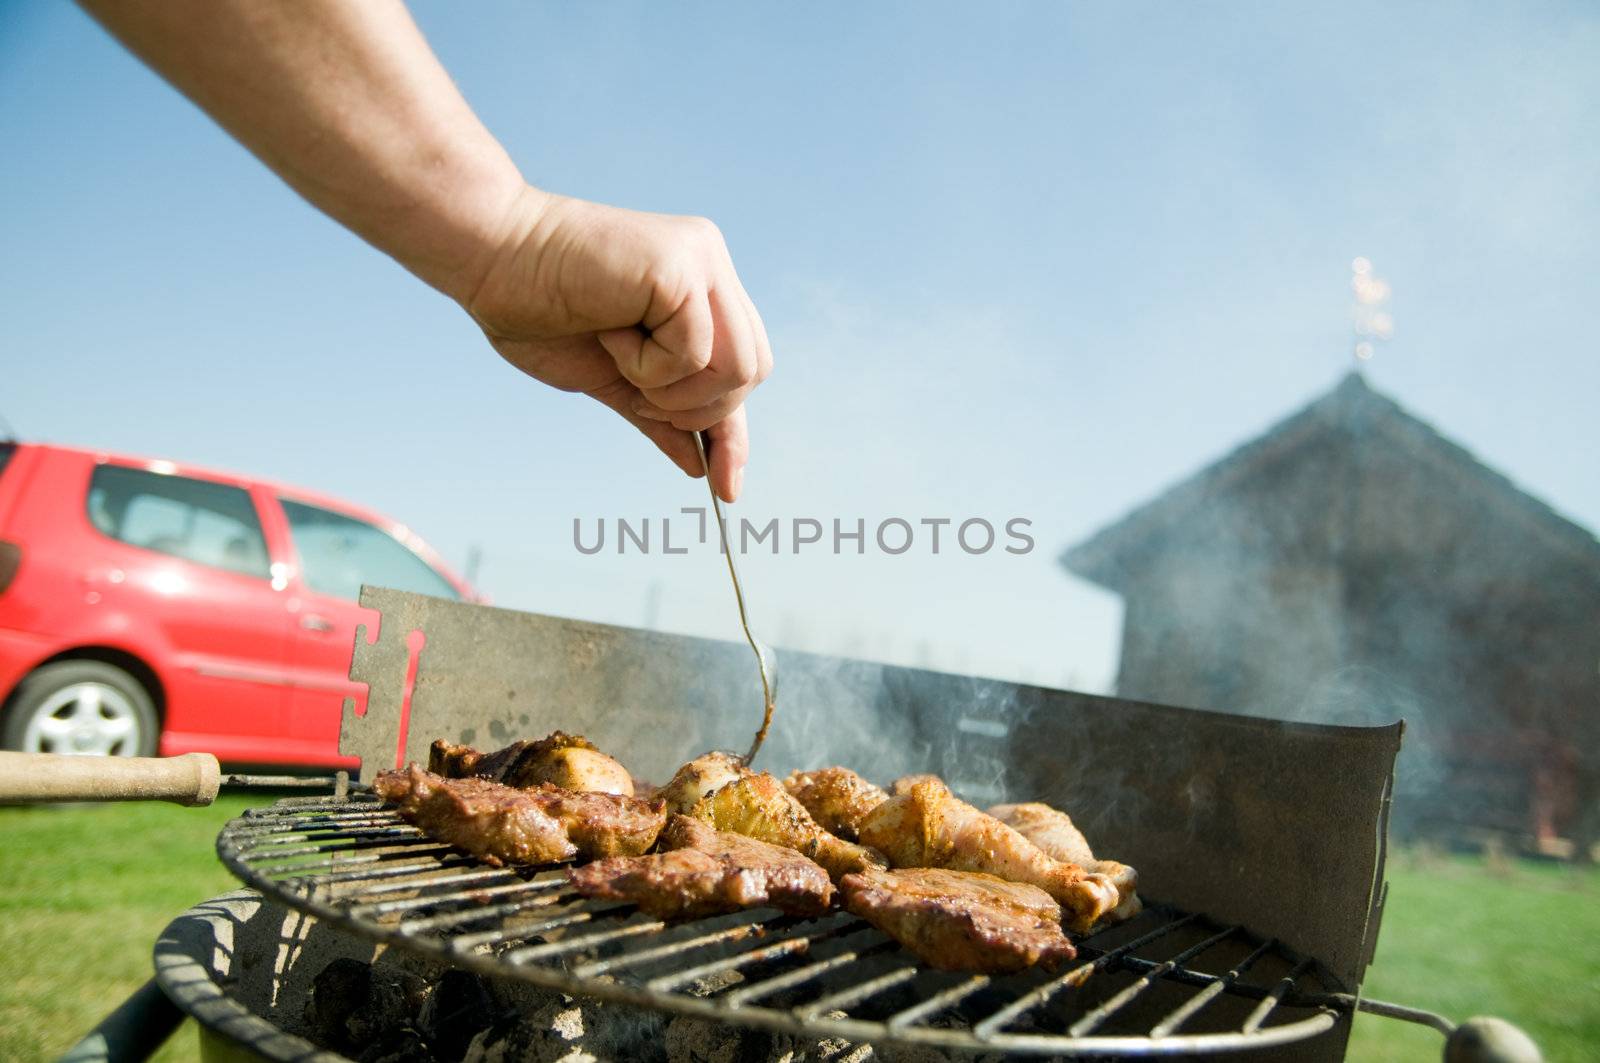 Barbecue by photocreo